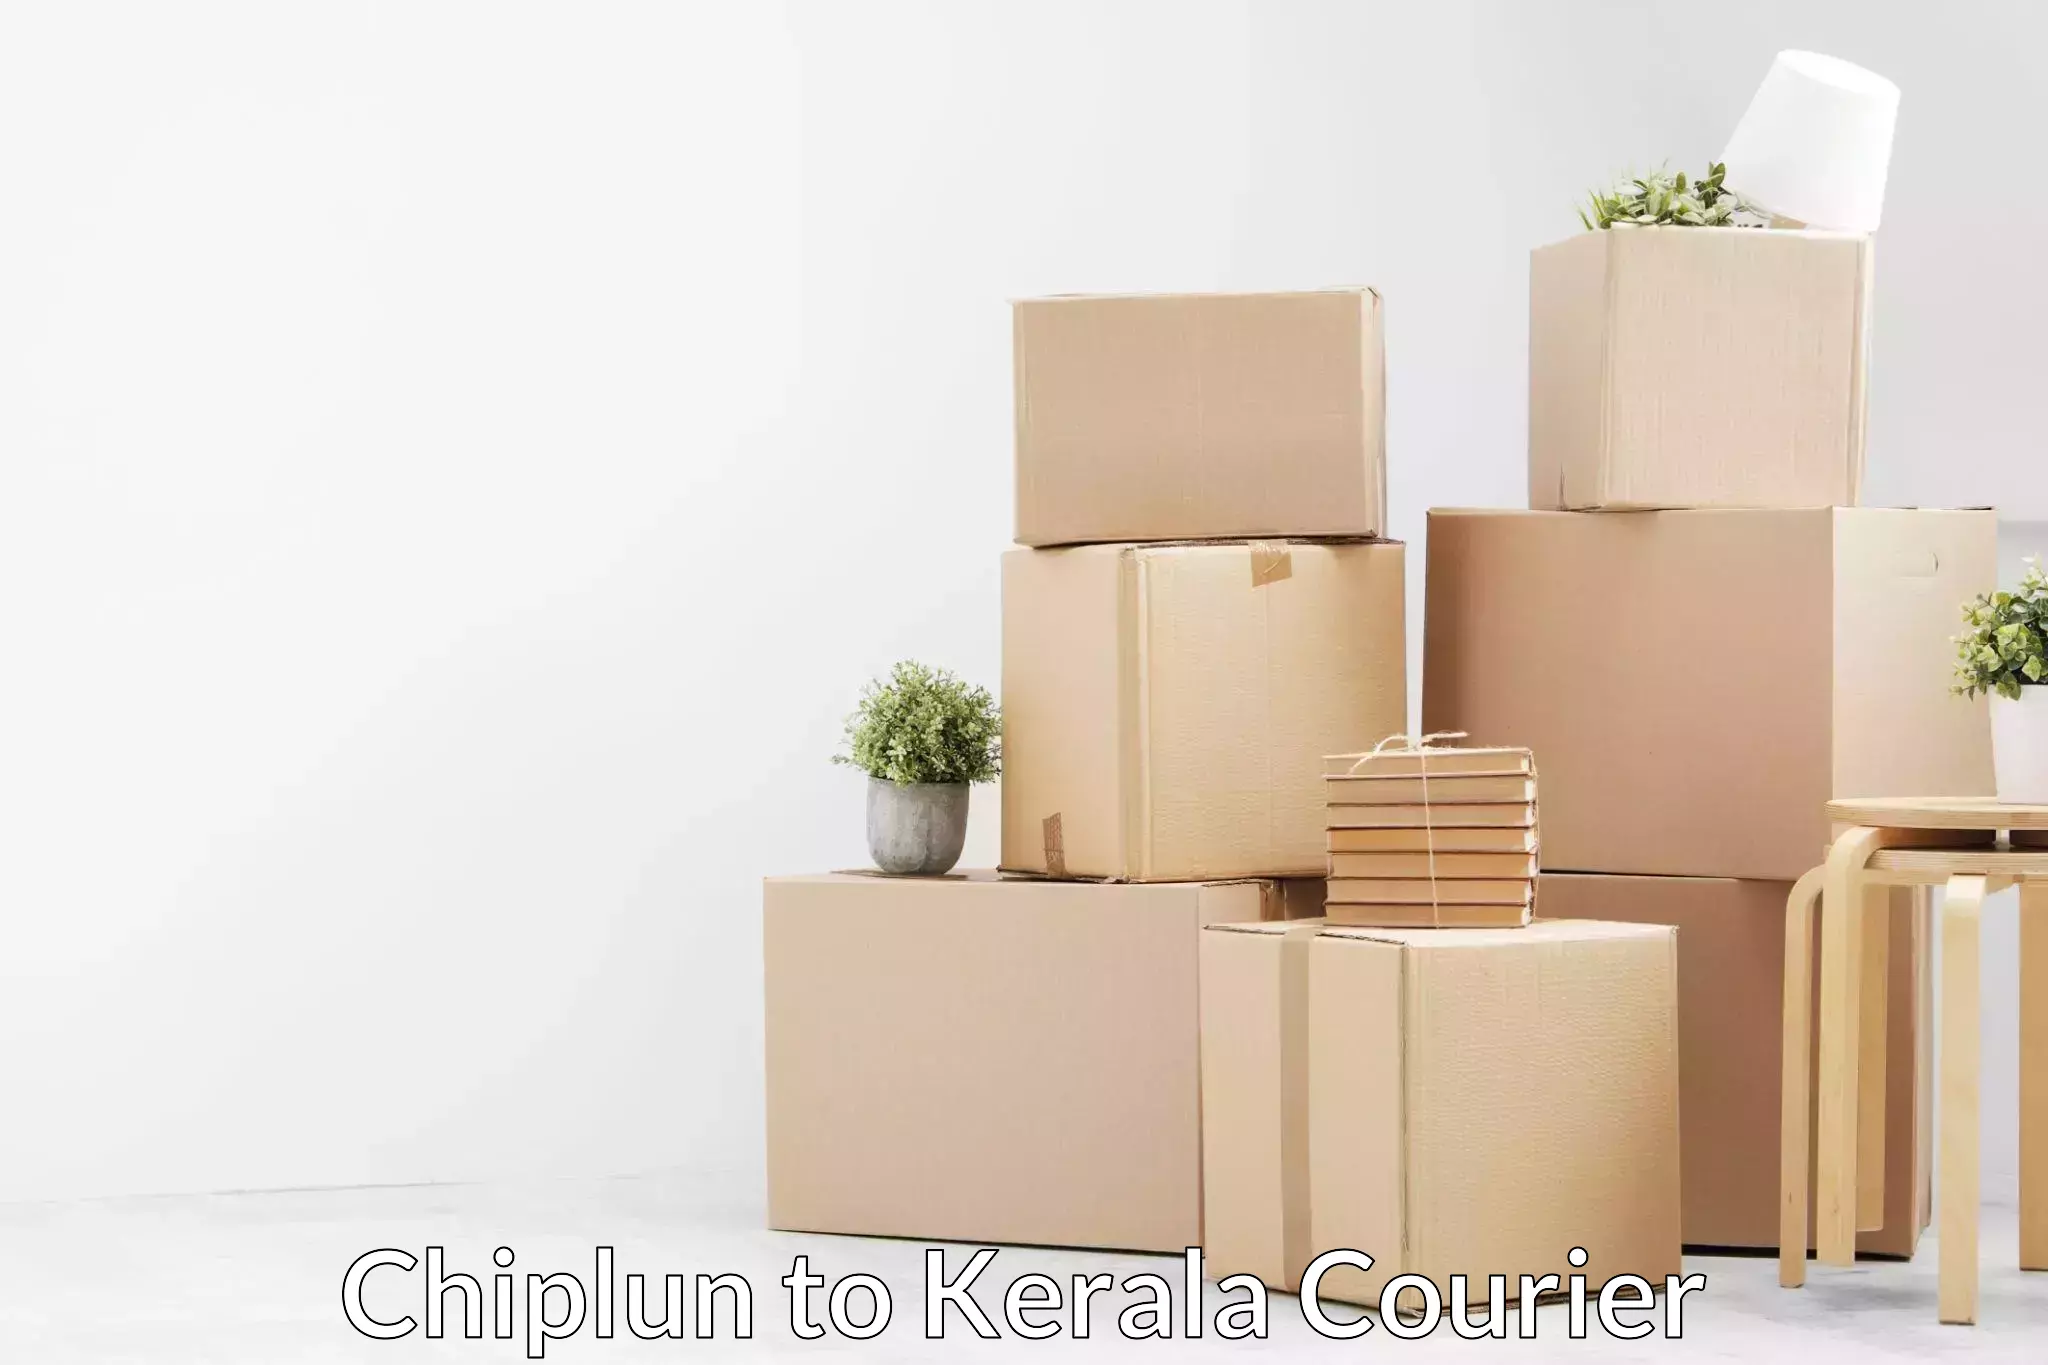 Full-service movers Chiplun to Kerala